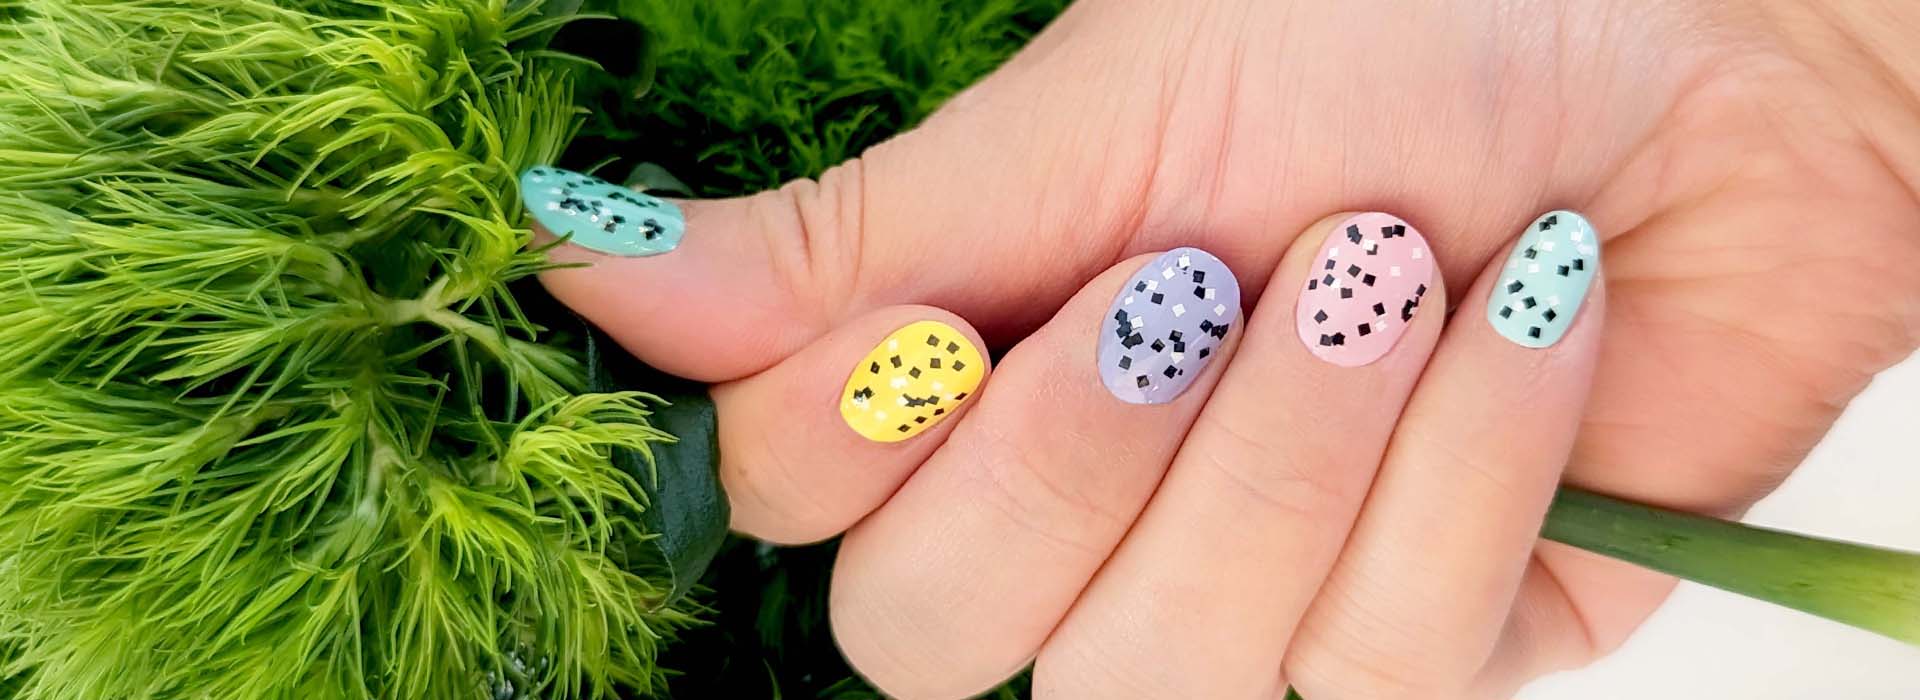 8. Pastel Nail Designs for Teenage Girls - wide 6